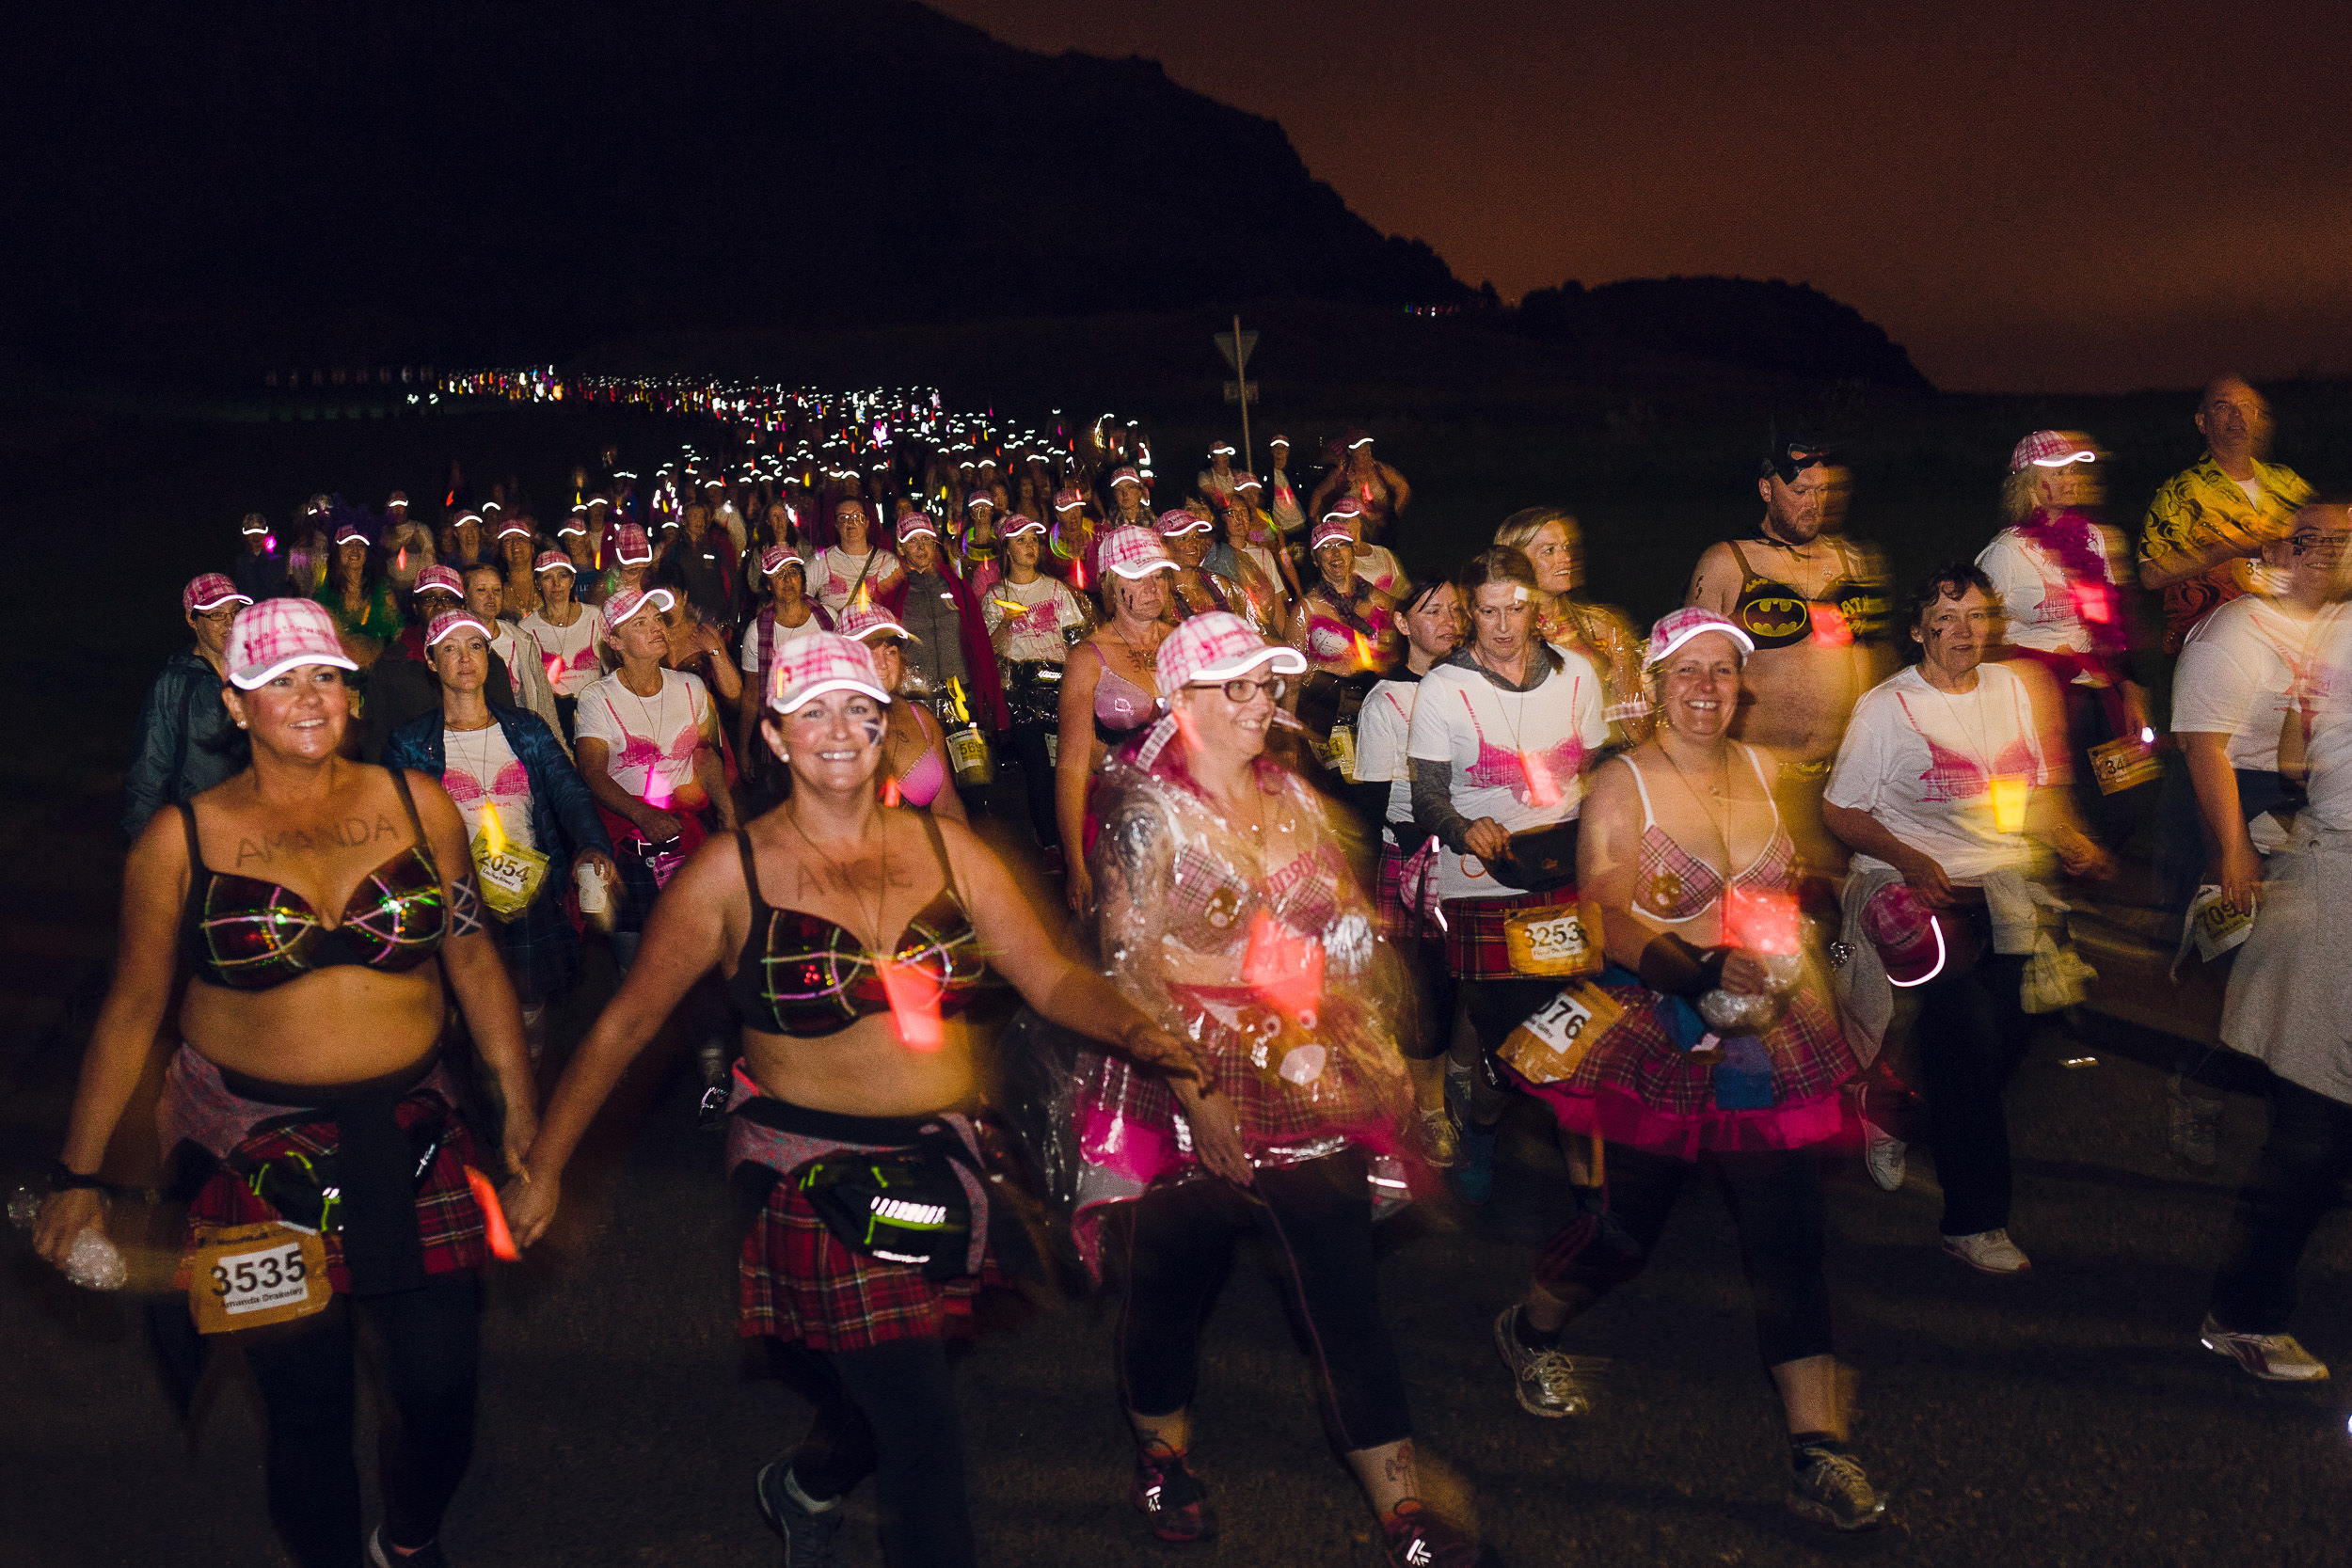 Participants taking part in the MoonWalk Scotland 2016 to raise money and awareness for breast cancer charity Walk the Walk.